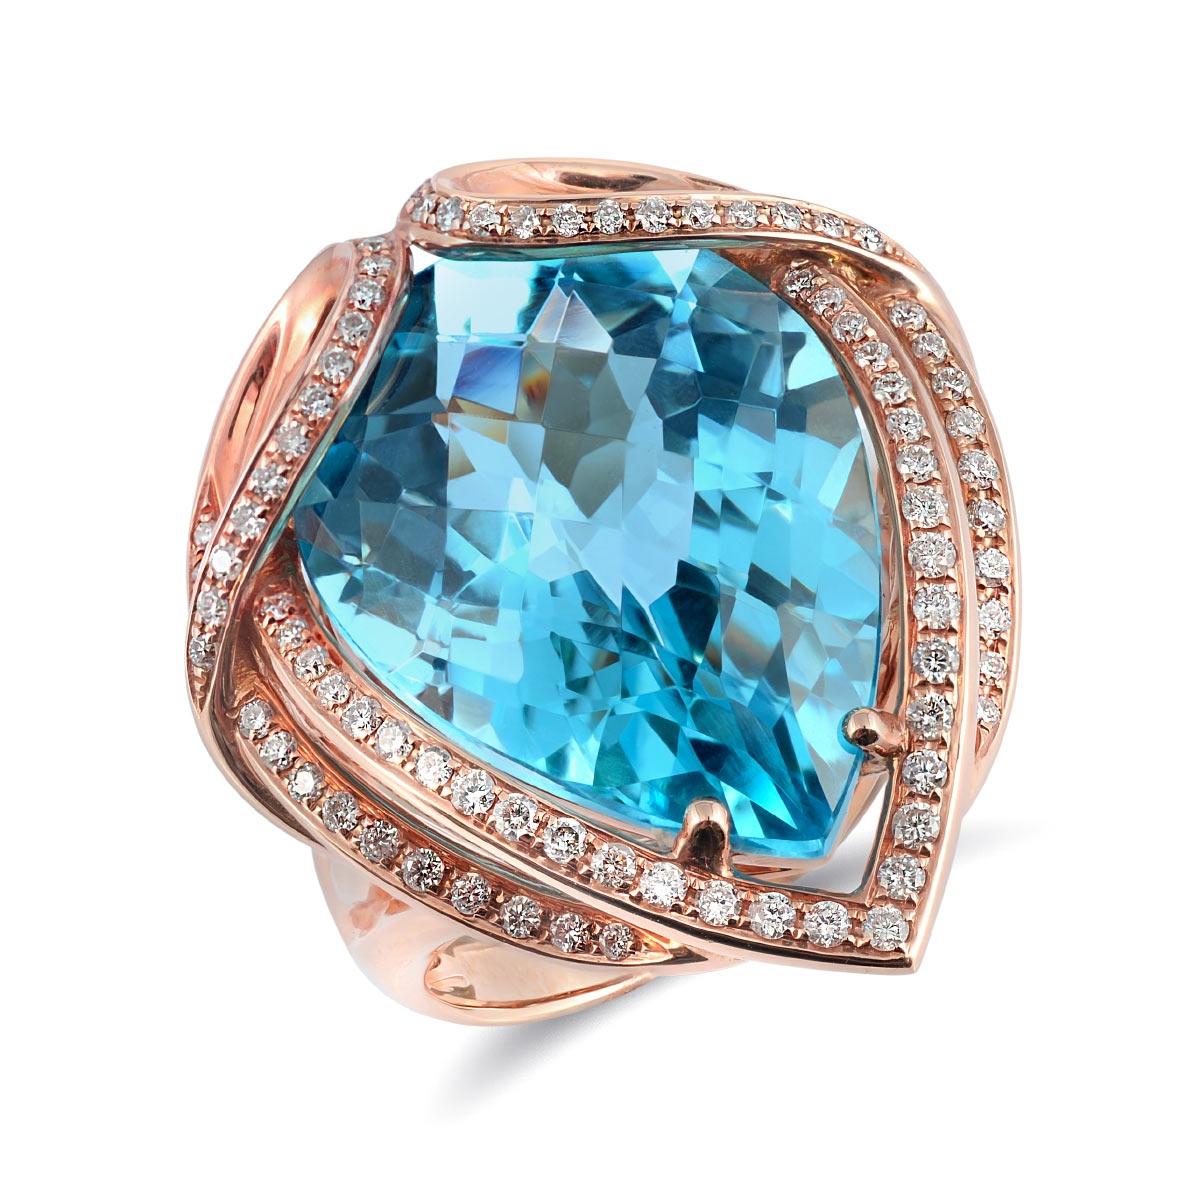  20.16 Carat Blue Topaz Diamonds set in 18K Rose Gold Ring  In New Condition For Sale In Los Angeles, CA